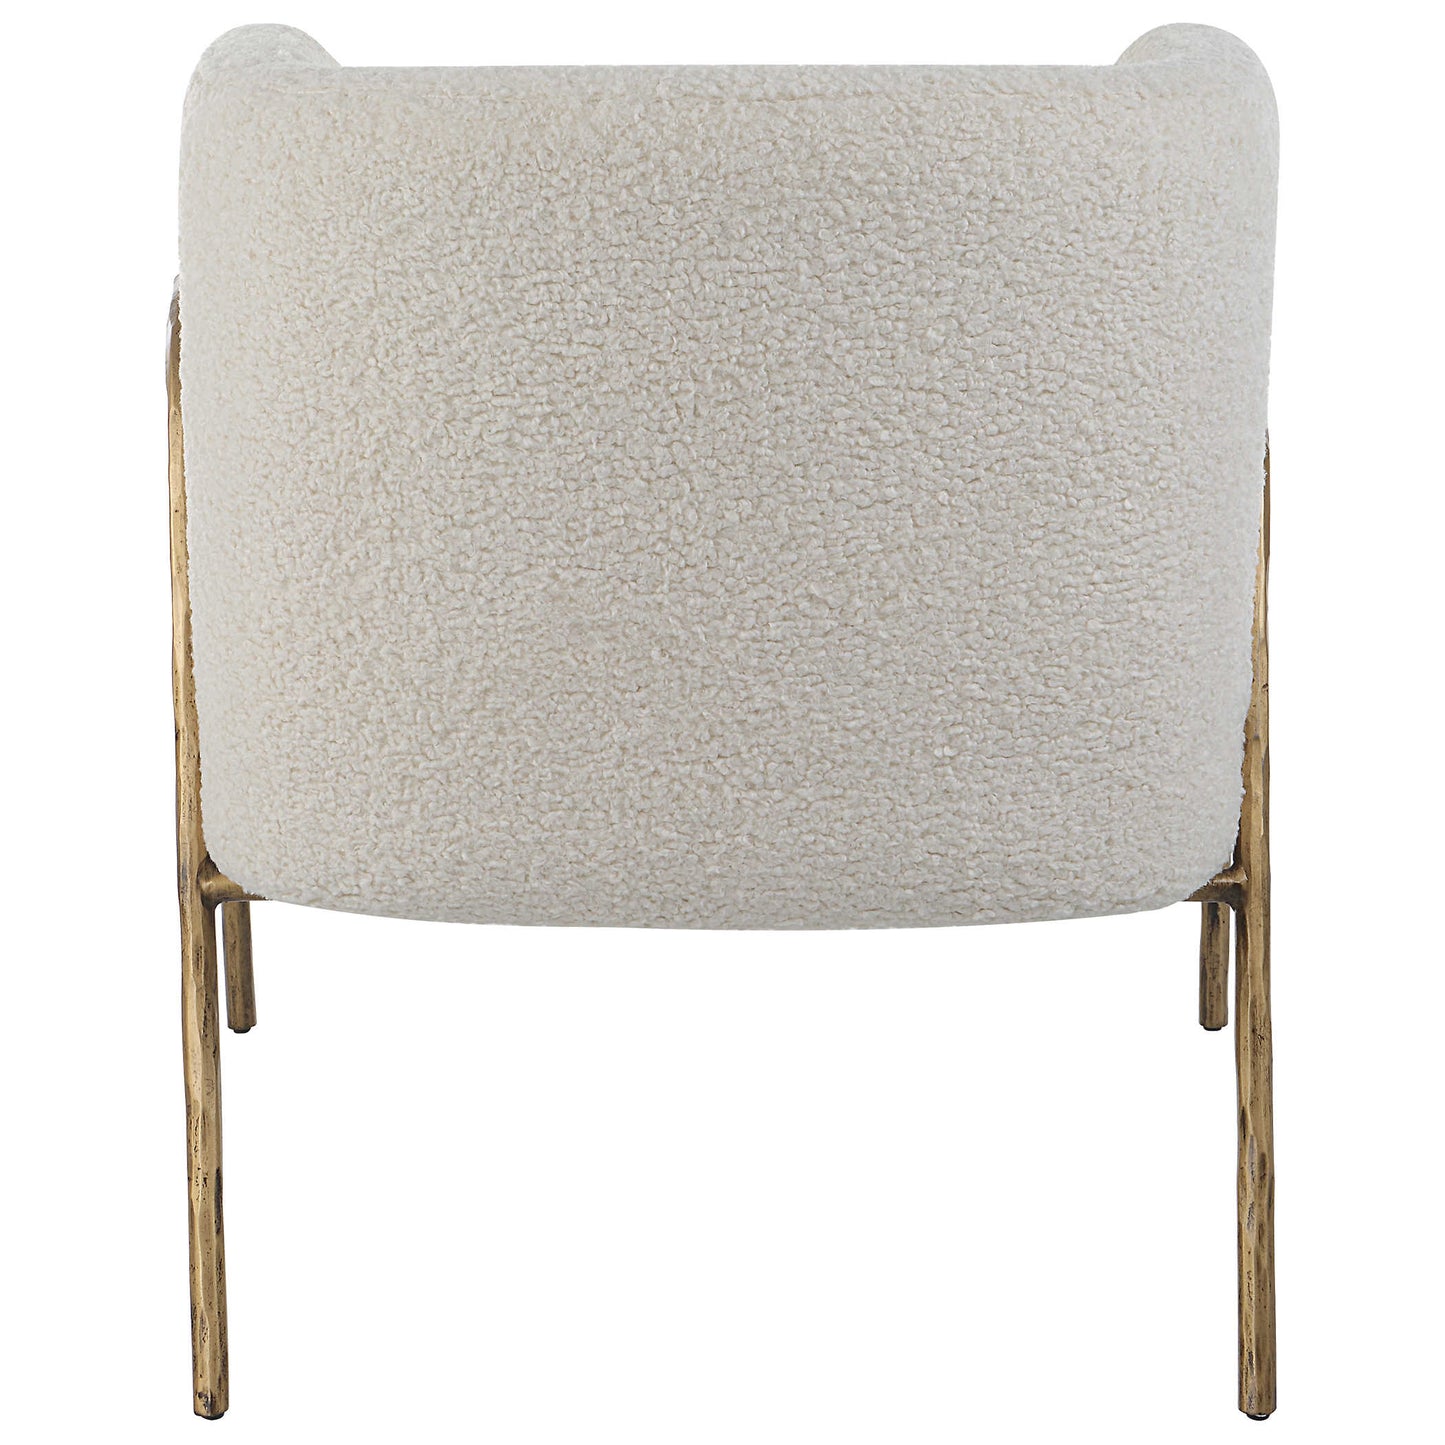 Jacob Accent Chair, Shearling